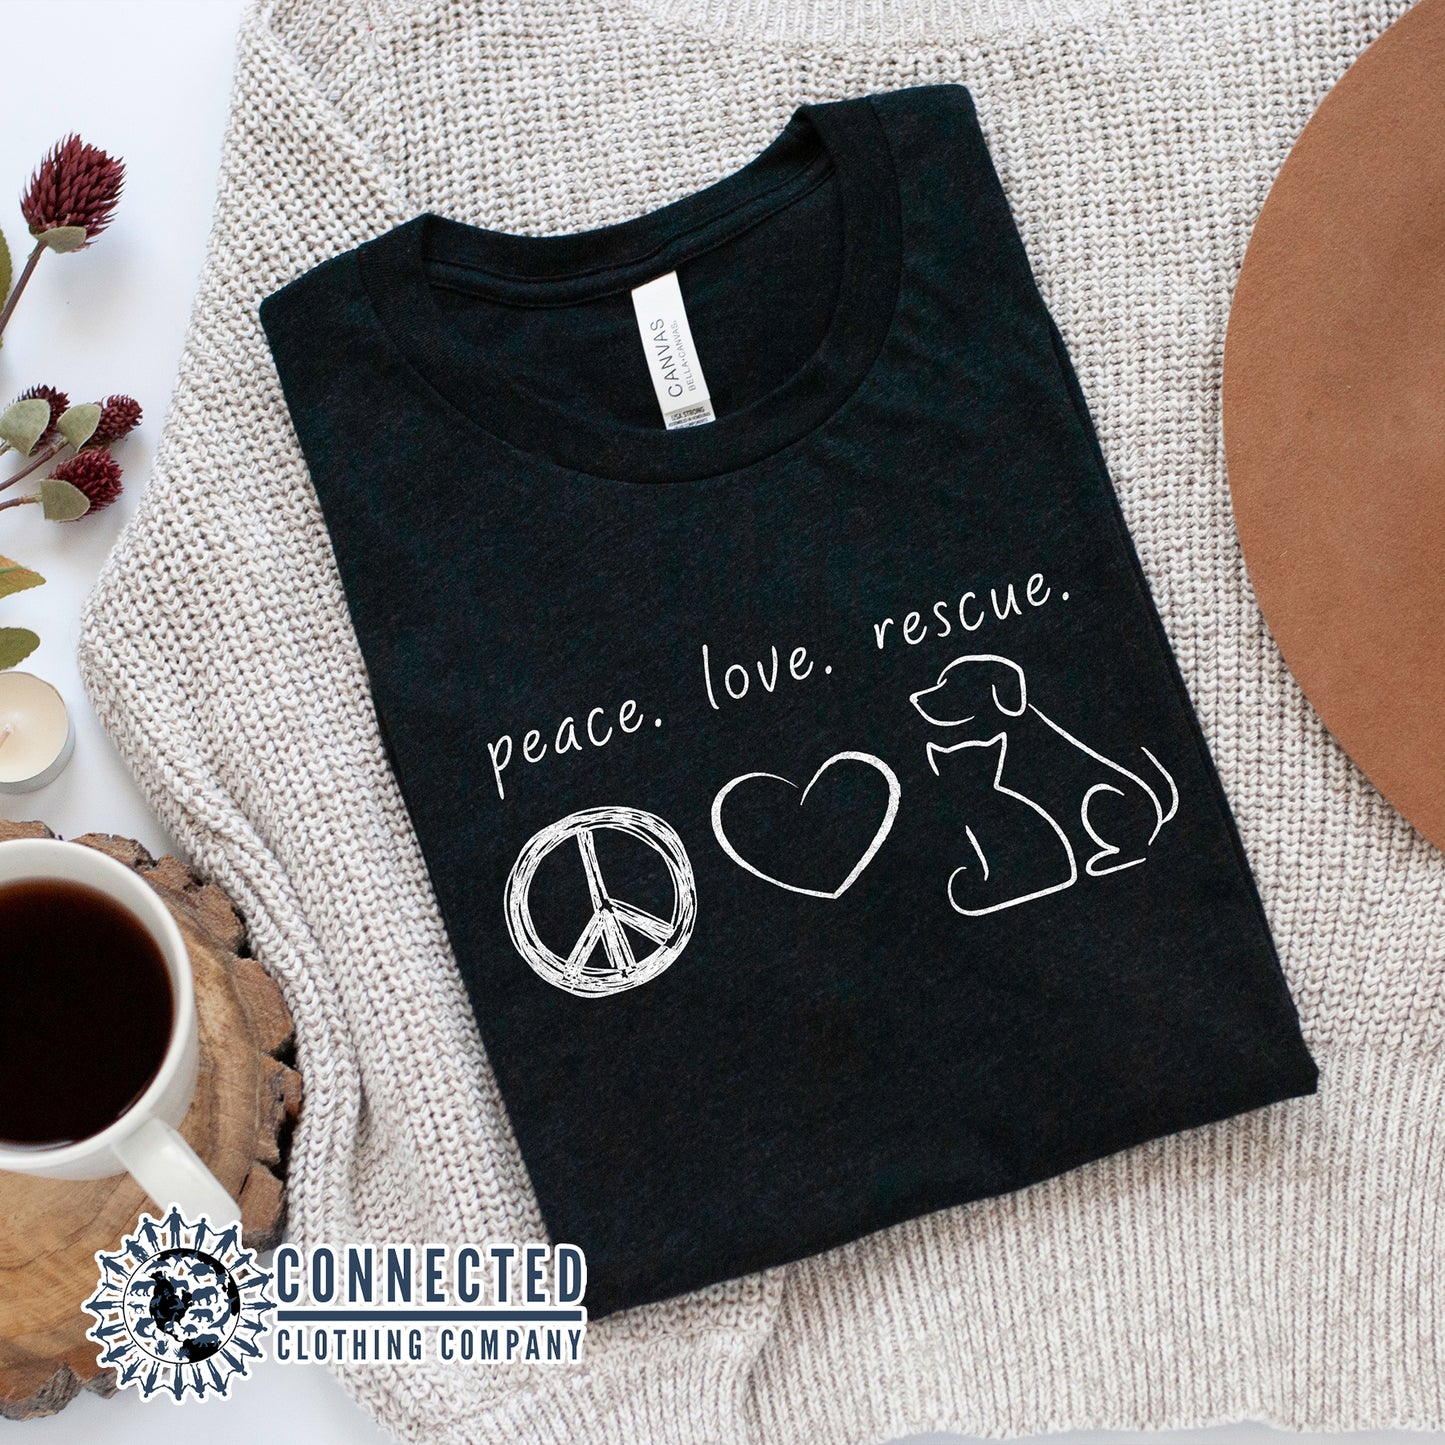 Peace Love Rescue Short-Sleeve Tee - Connected Clothing Company - Ethically and Sustainably Made - 10% donated to Villalobos Animal Rescue Center